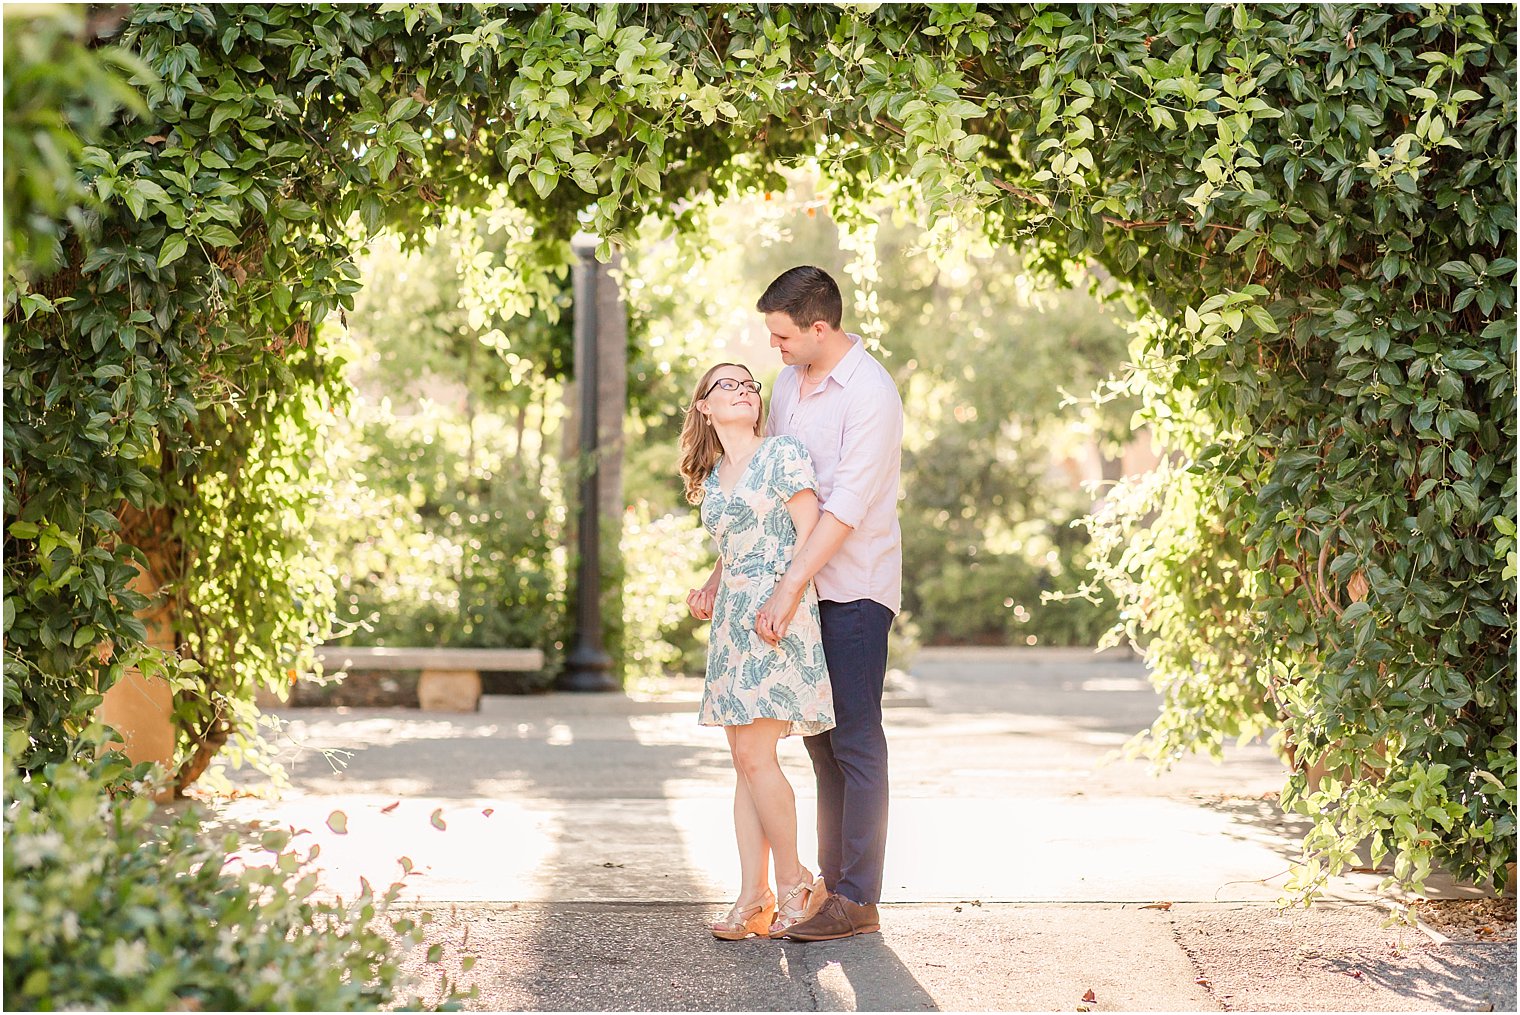 Engagement photo under greenery arch